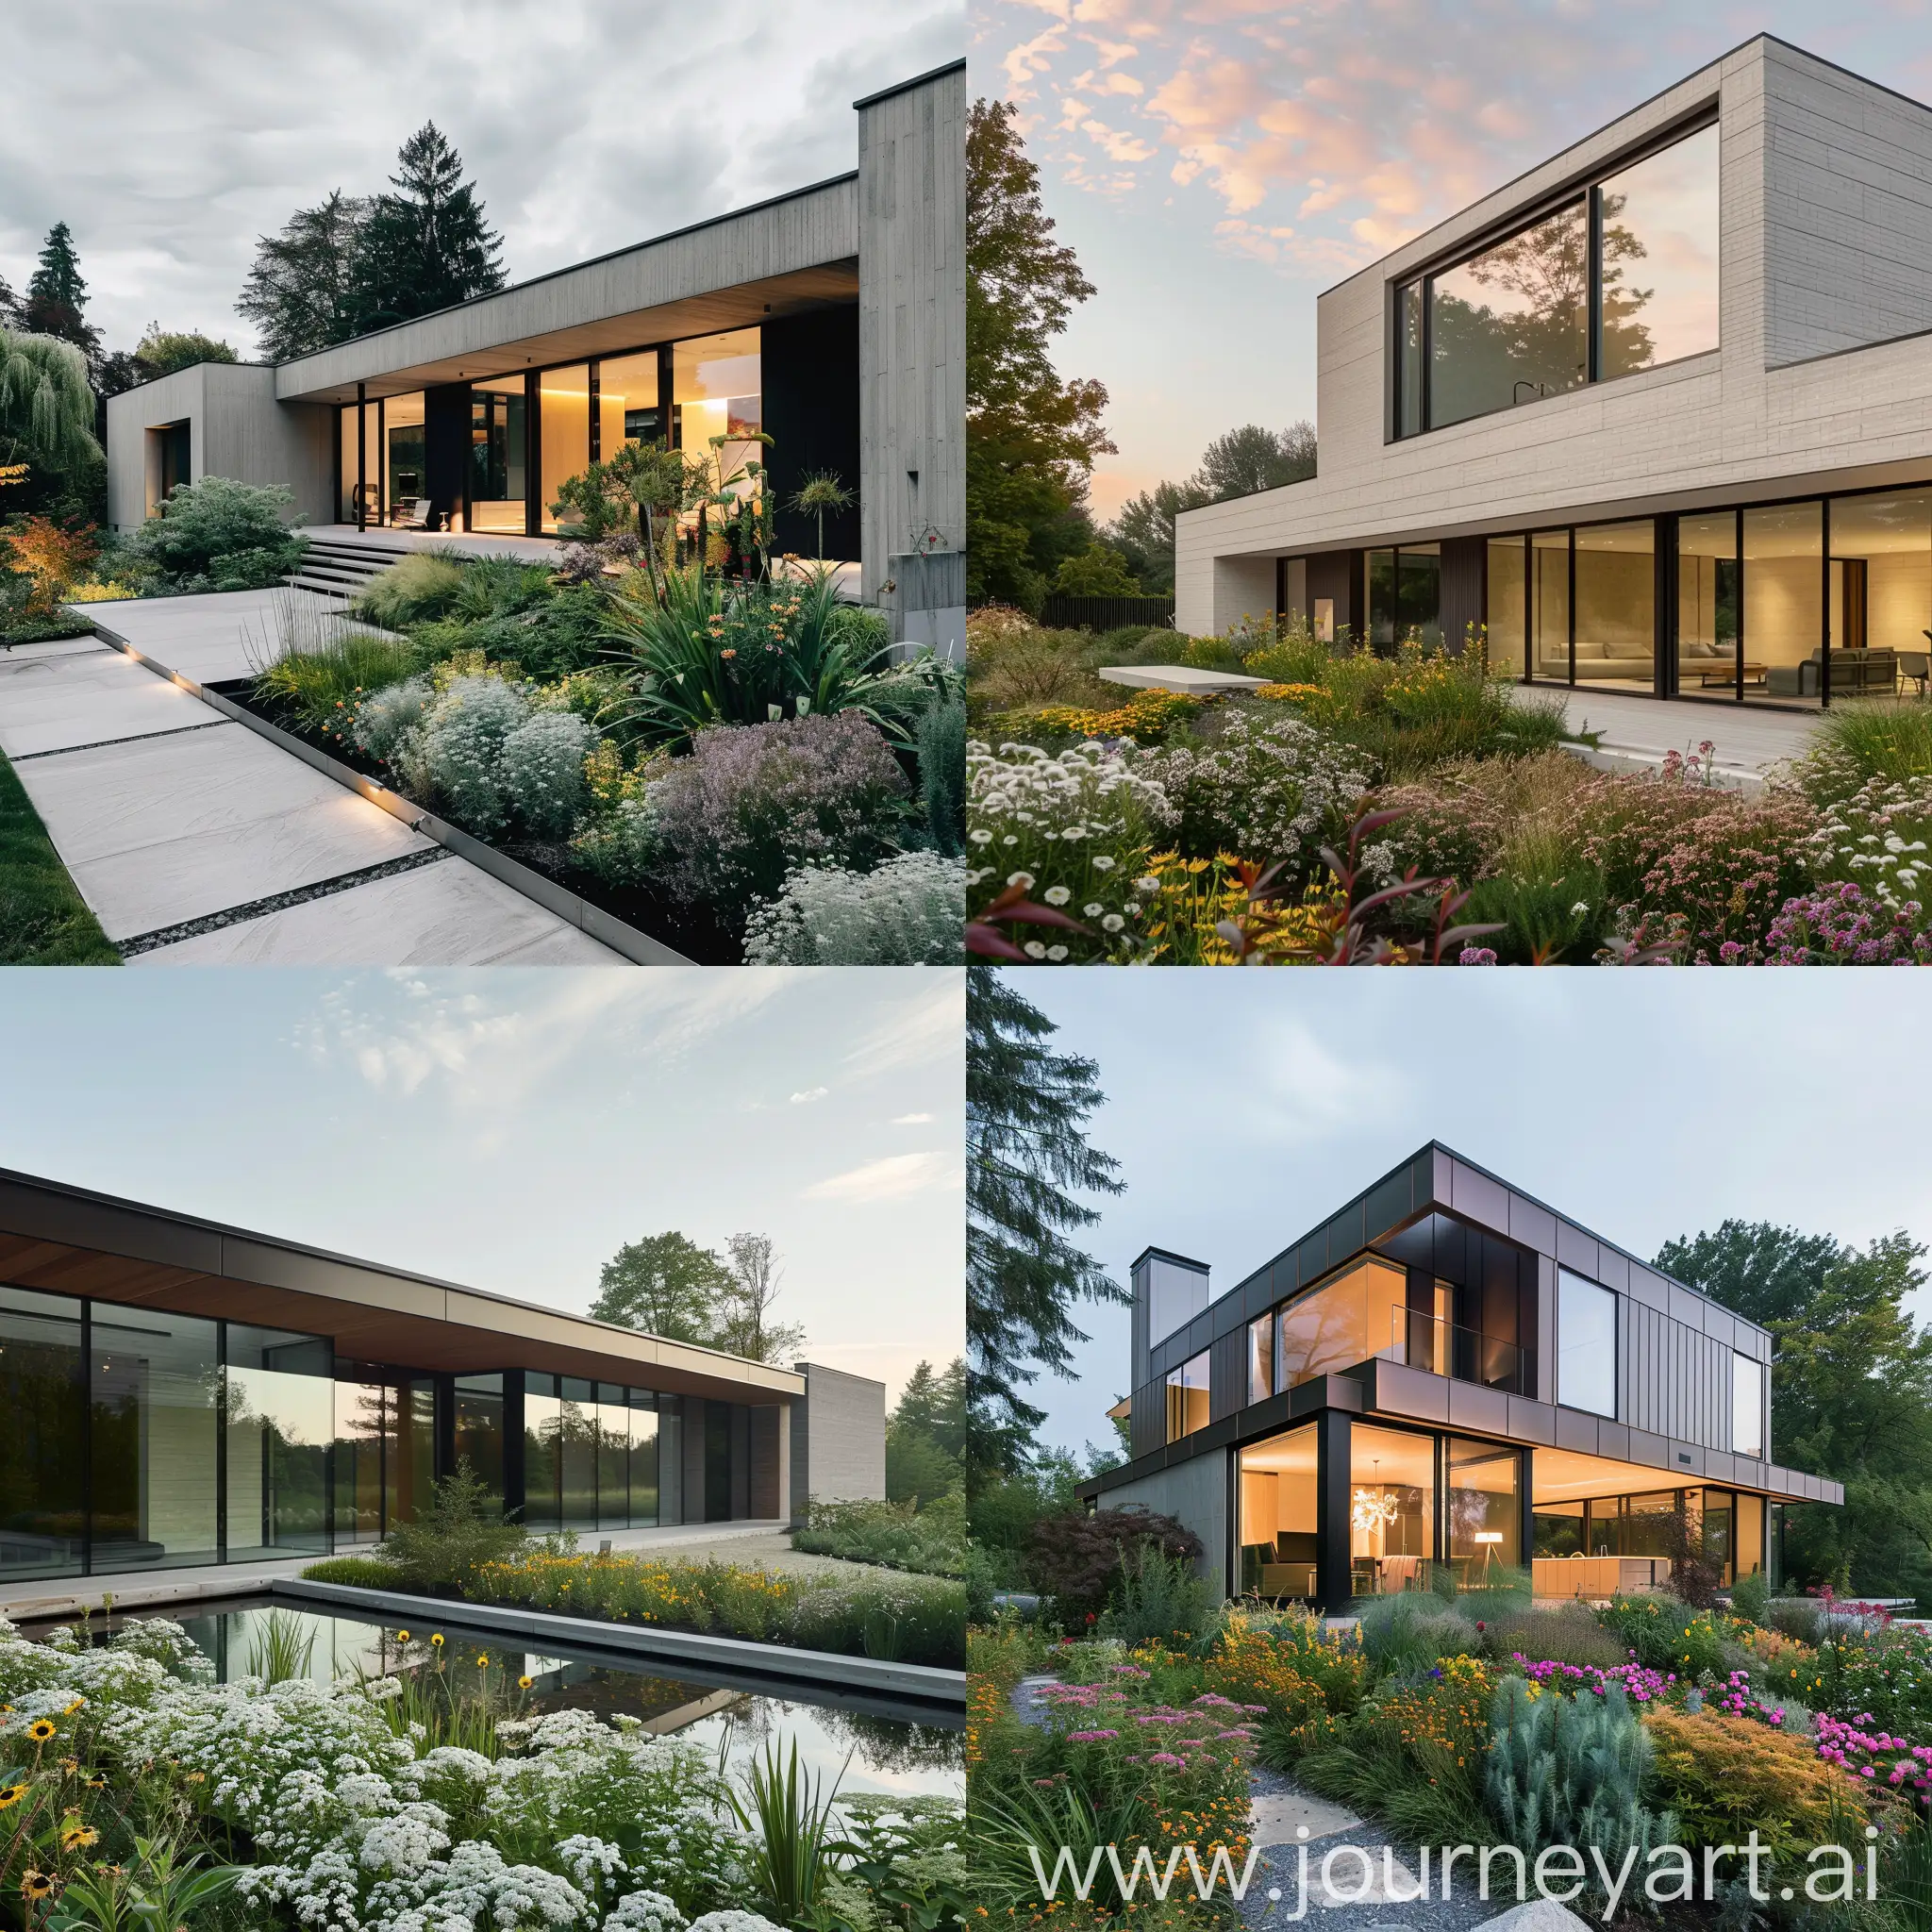 Minimalist-Architecture-Exterior-Surrounded-by-Perennials